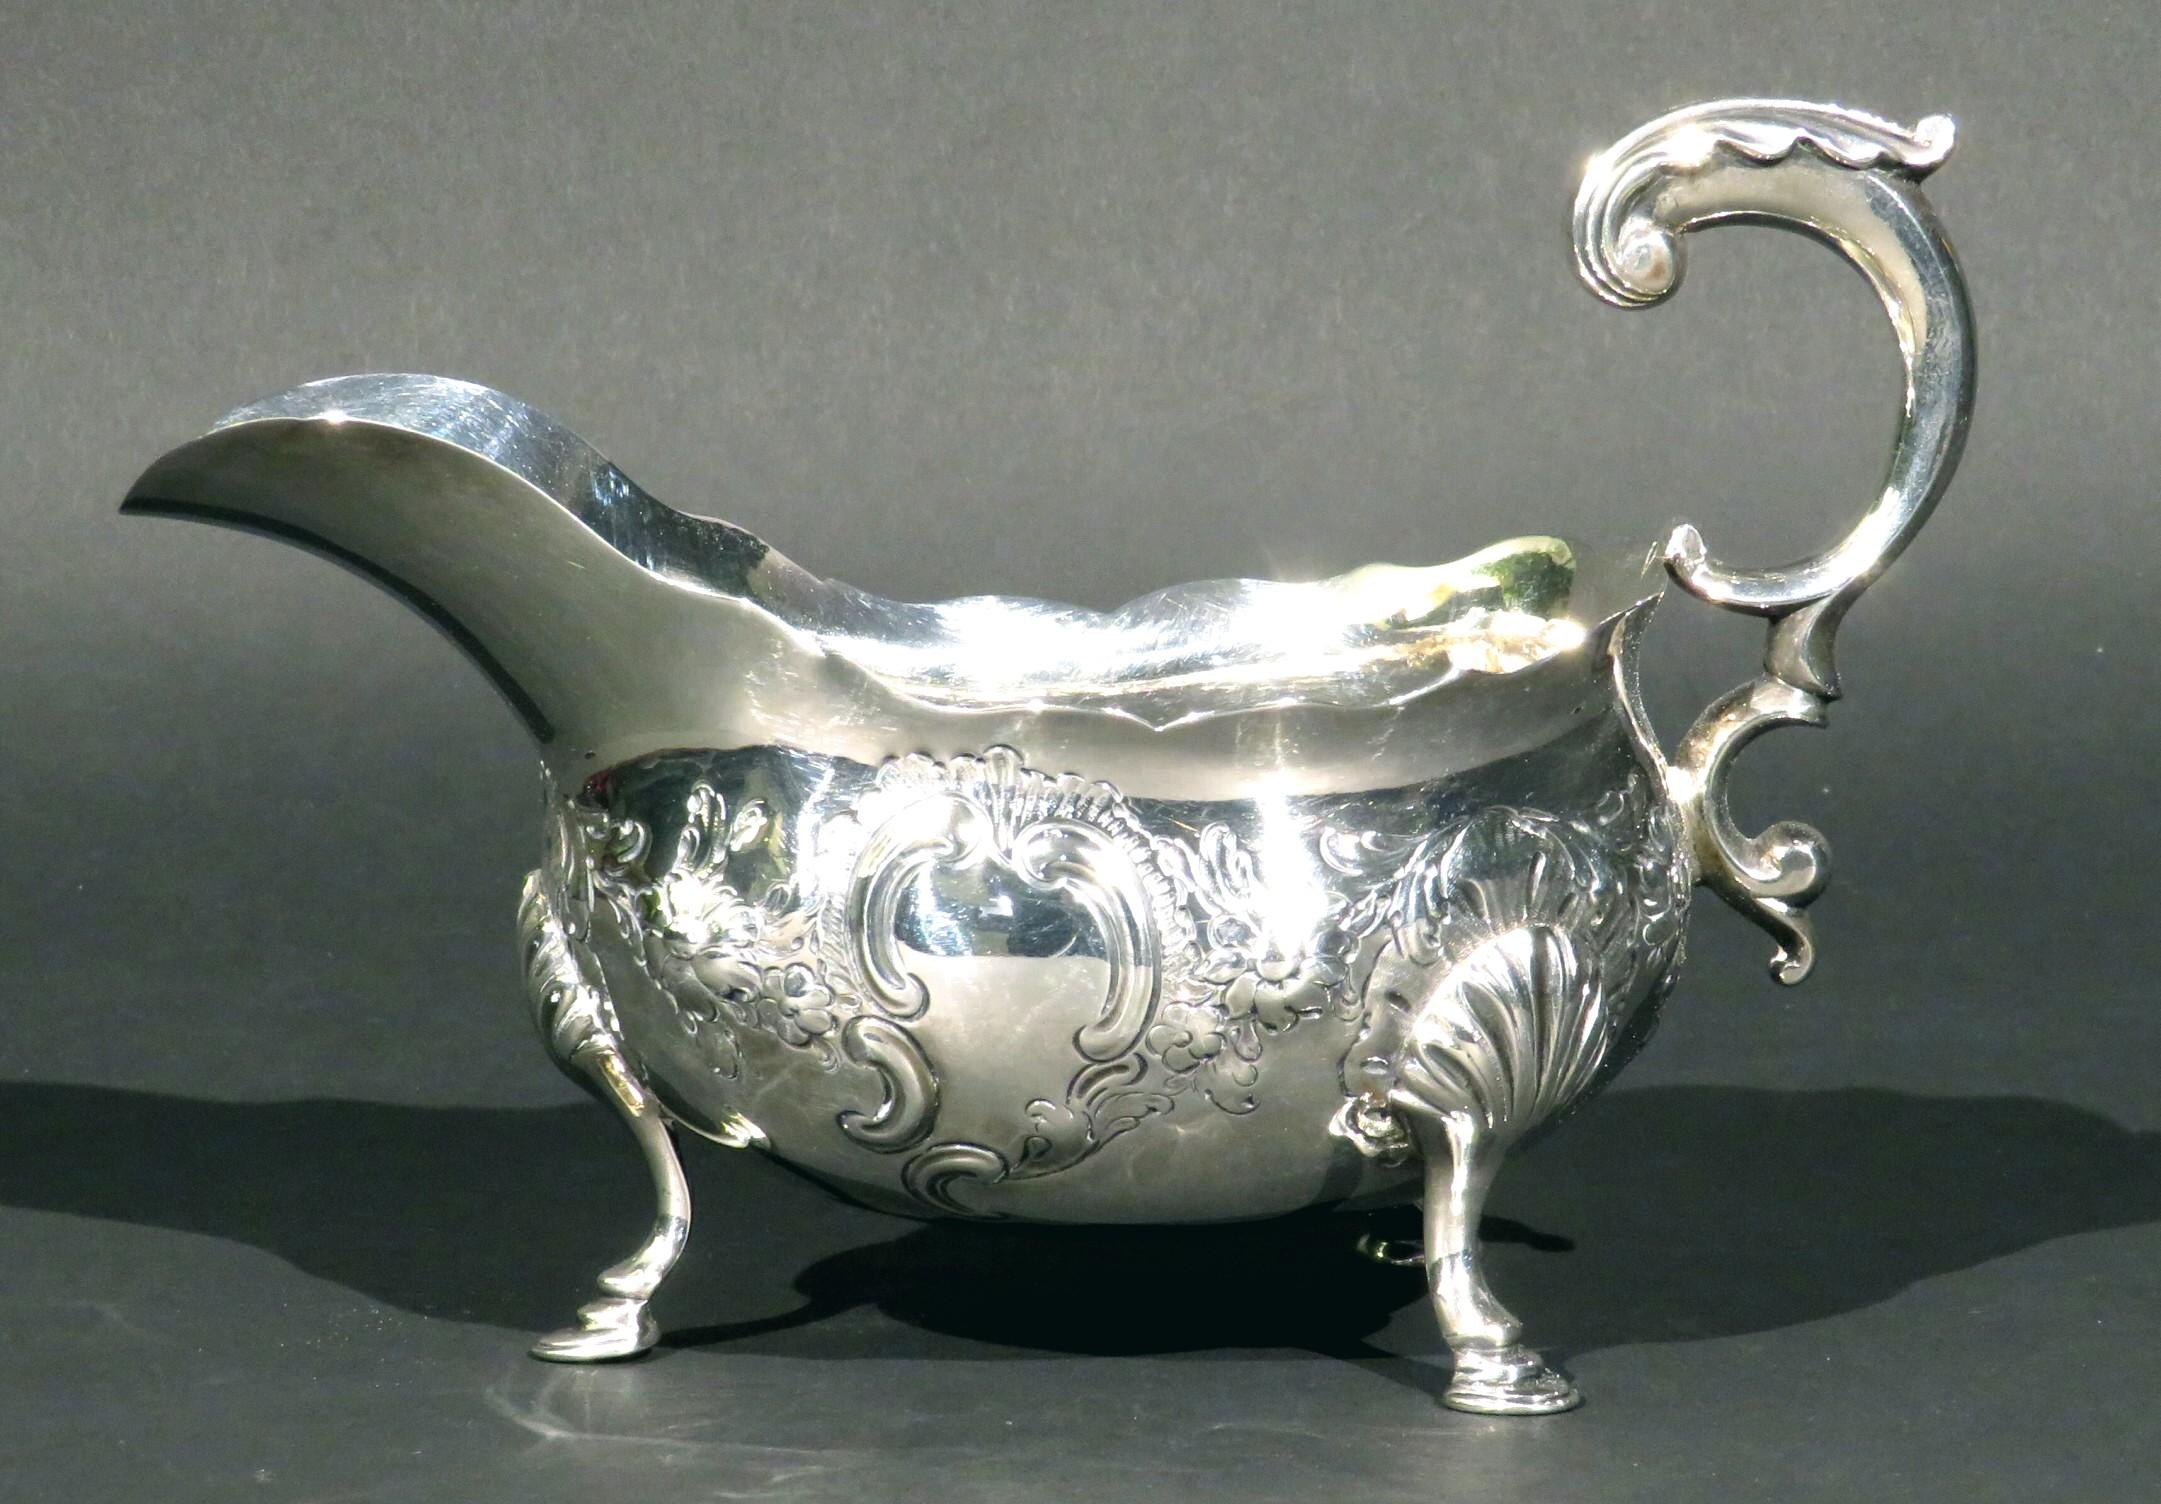 A very fine & generously proportioned mid 18th century Georgian sterling silver gravy boat, showing foliate embossed motifs and a blank cartouche, affixed with an impressive double-scrolled foliate cast handle. Raised overall on cabriole supports